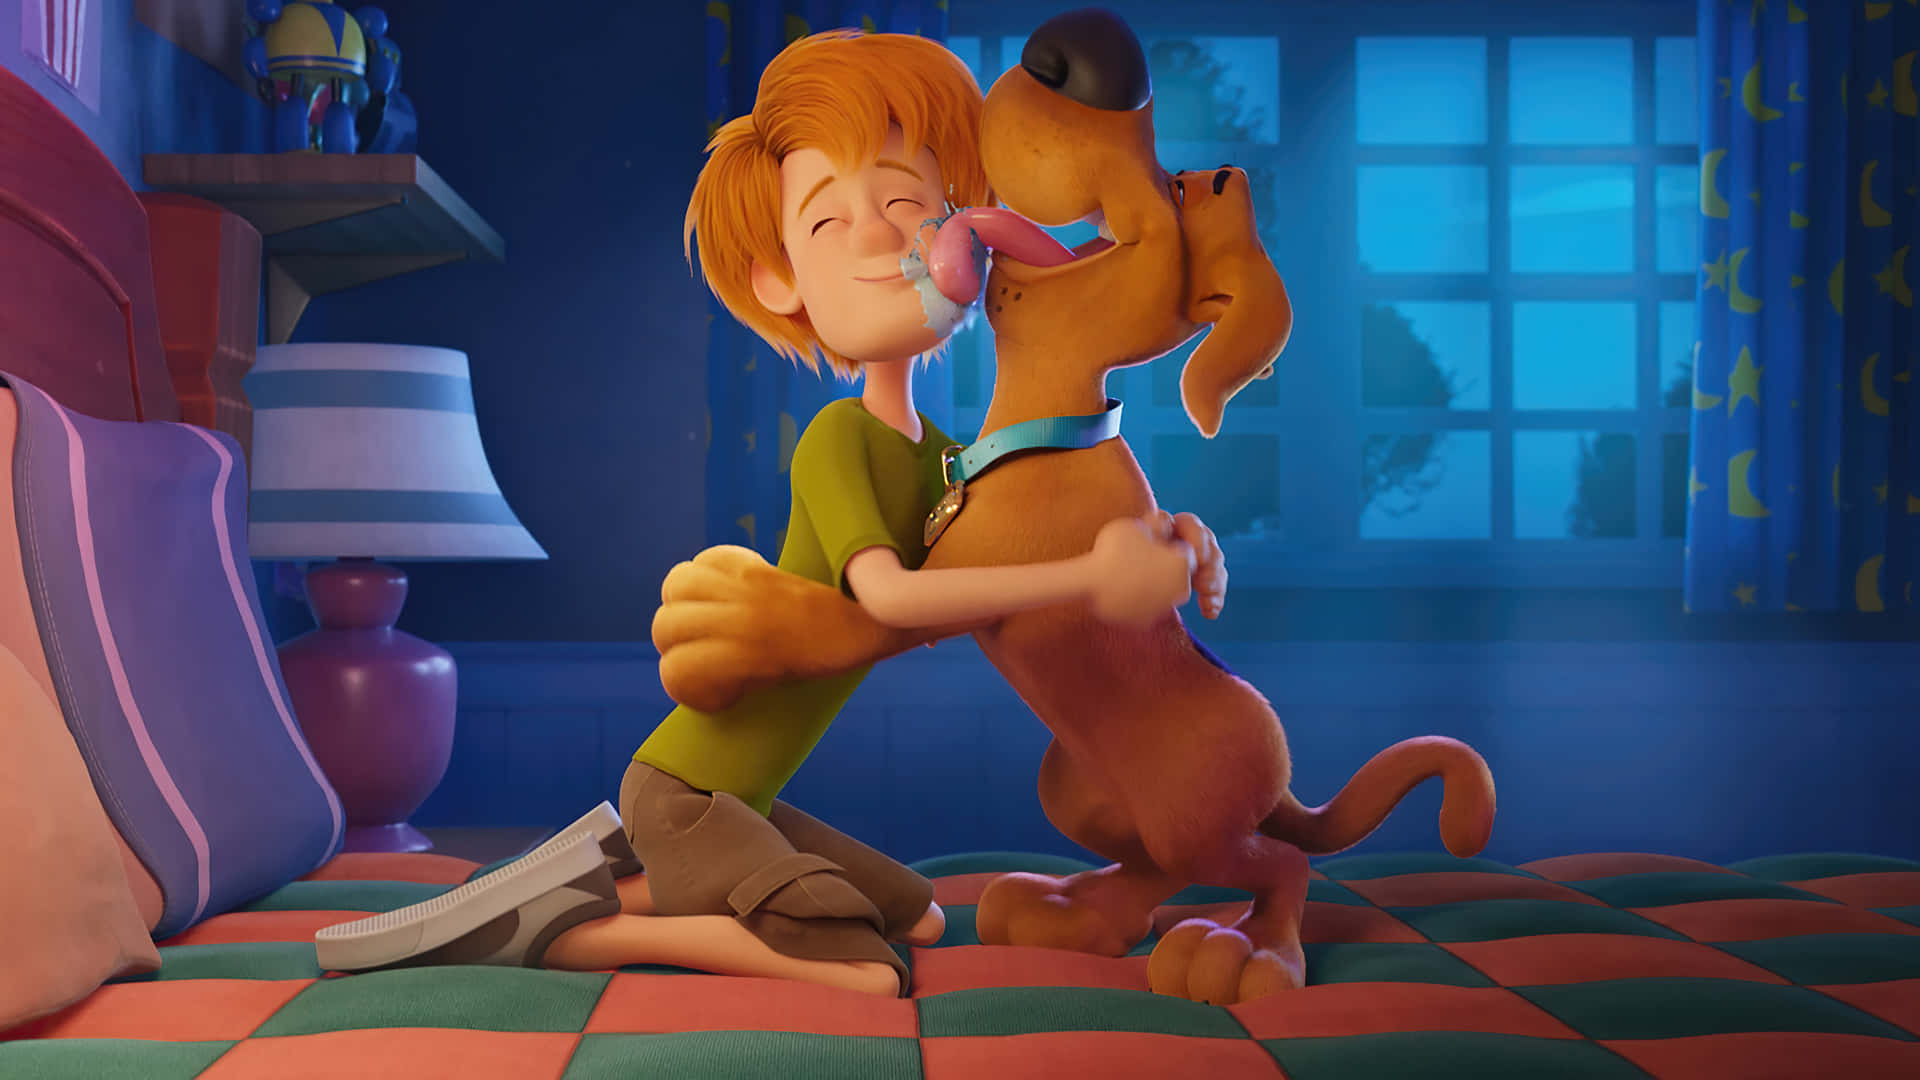 Get Ready To Solve Some Mysteries With Scooby-Doo